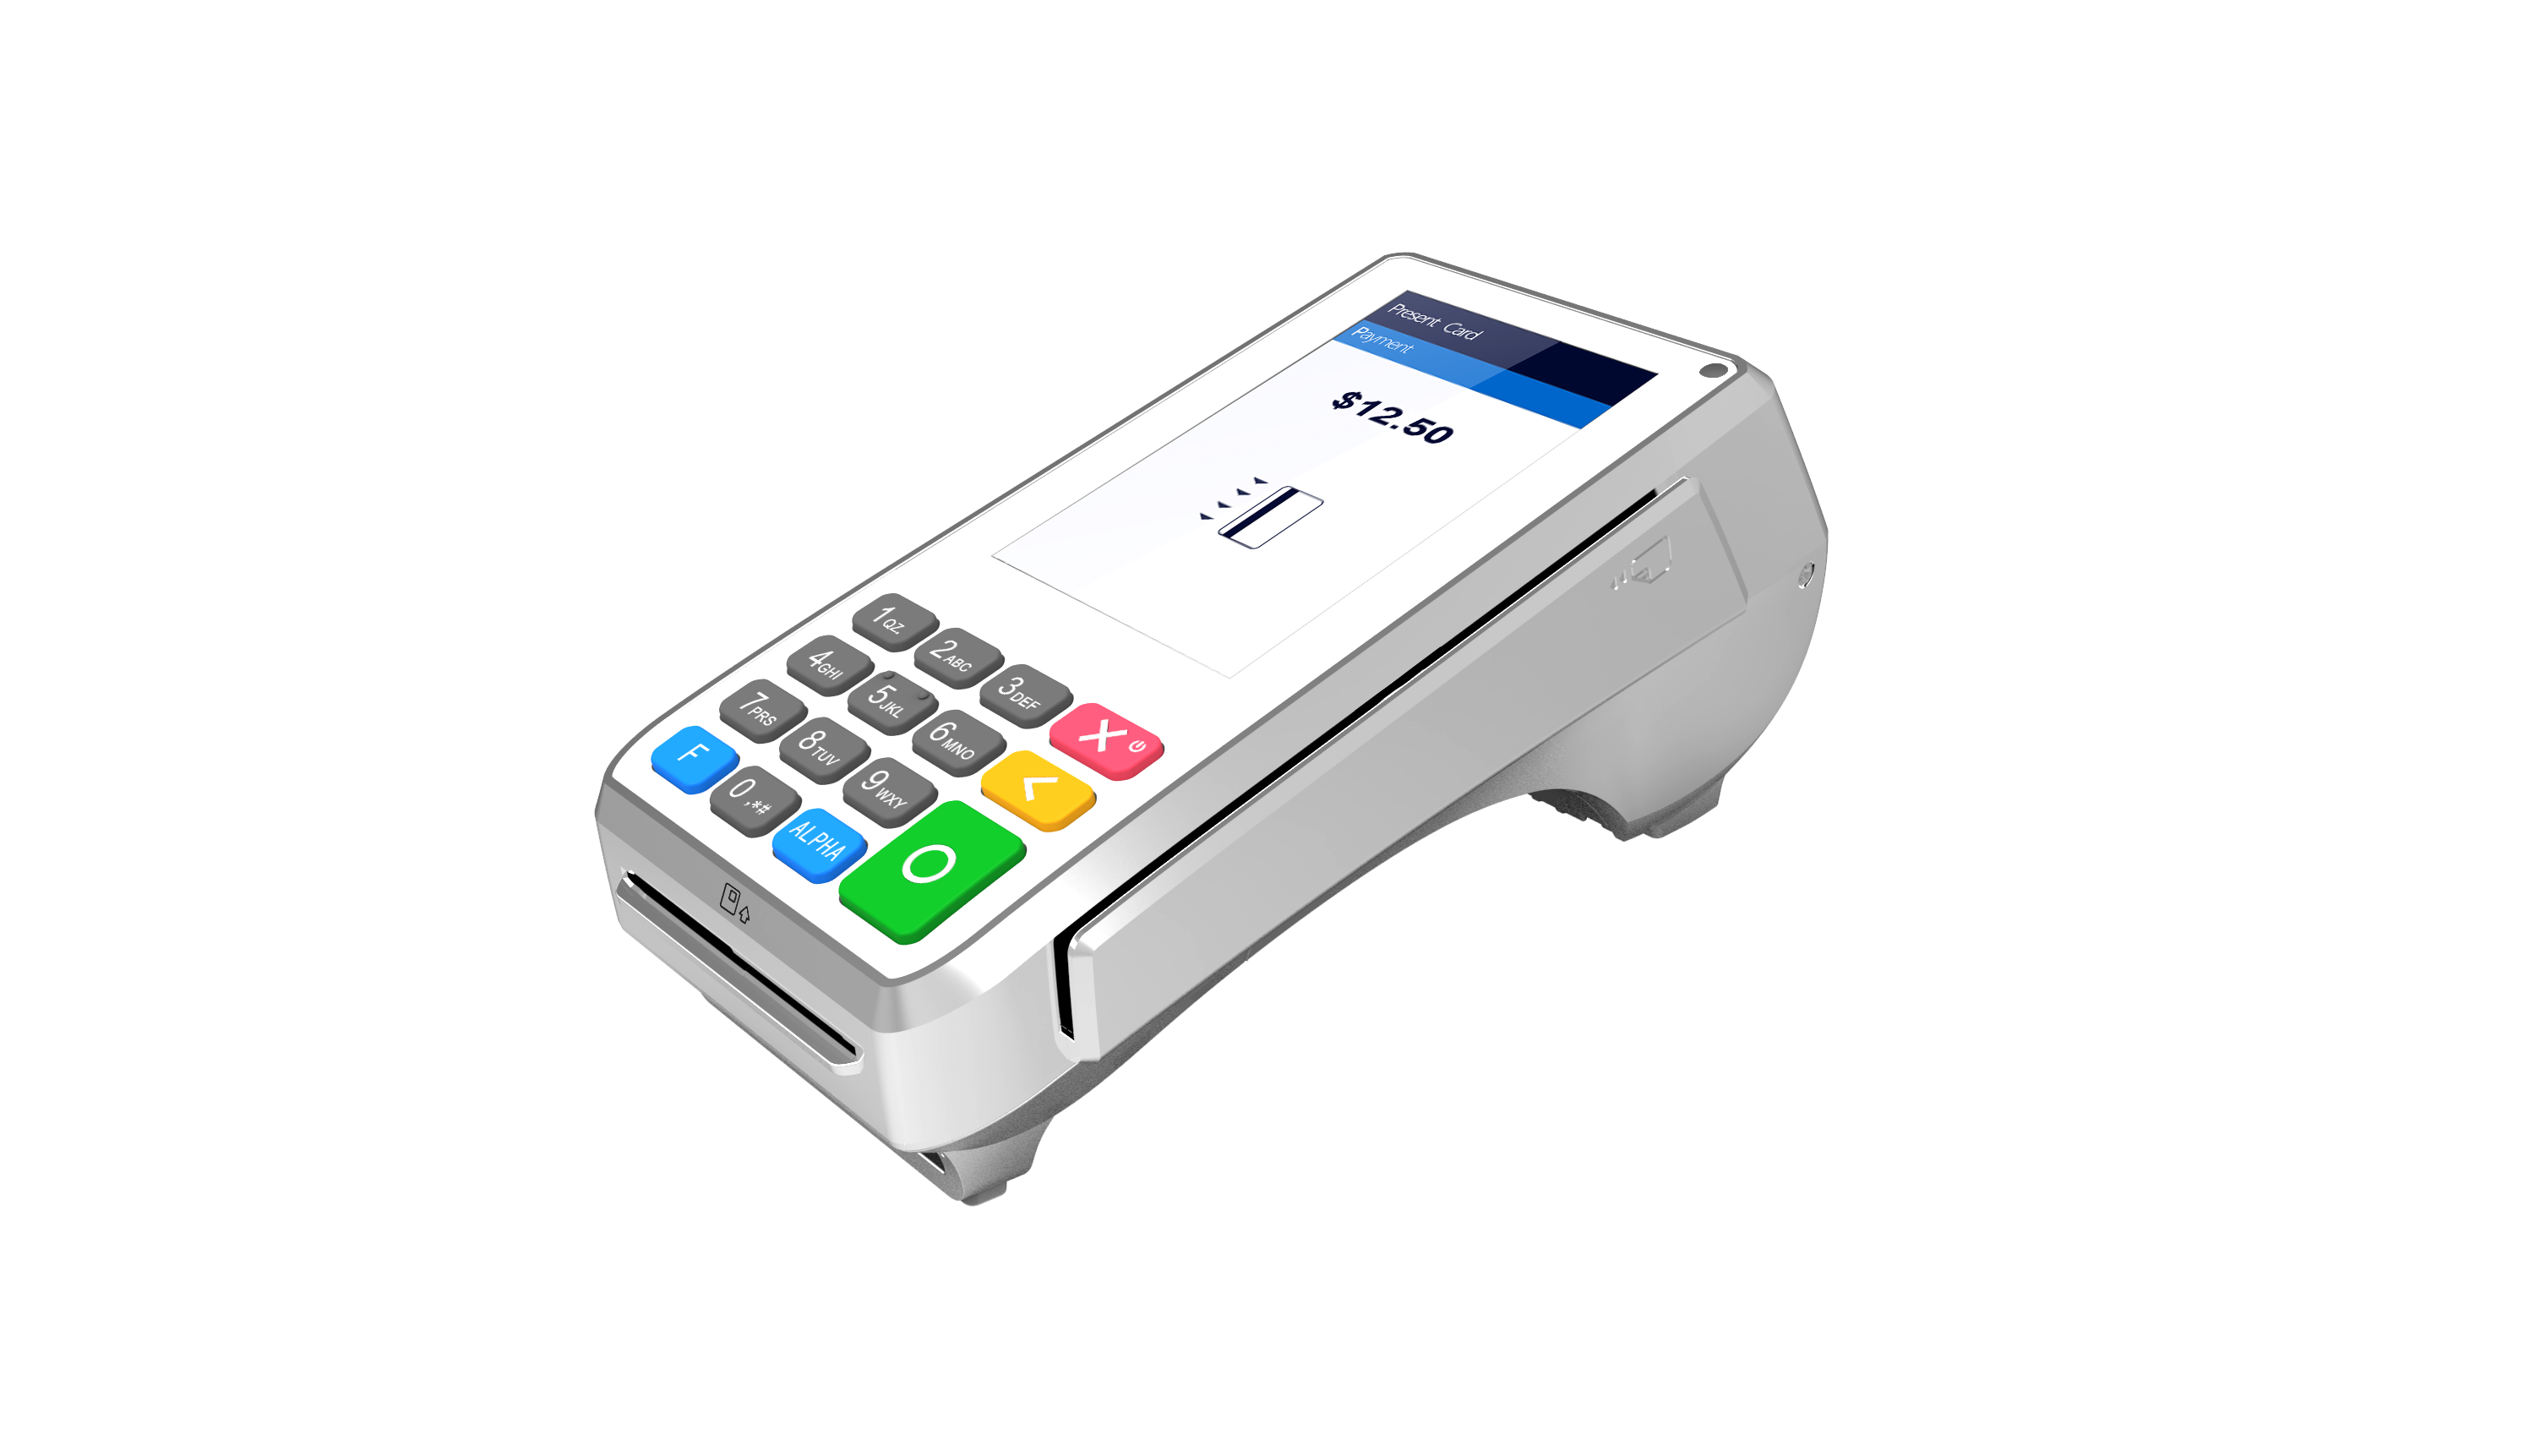 Pax A80 Countertop Payment Terminal A80 Mba Rd5 01aa